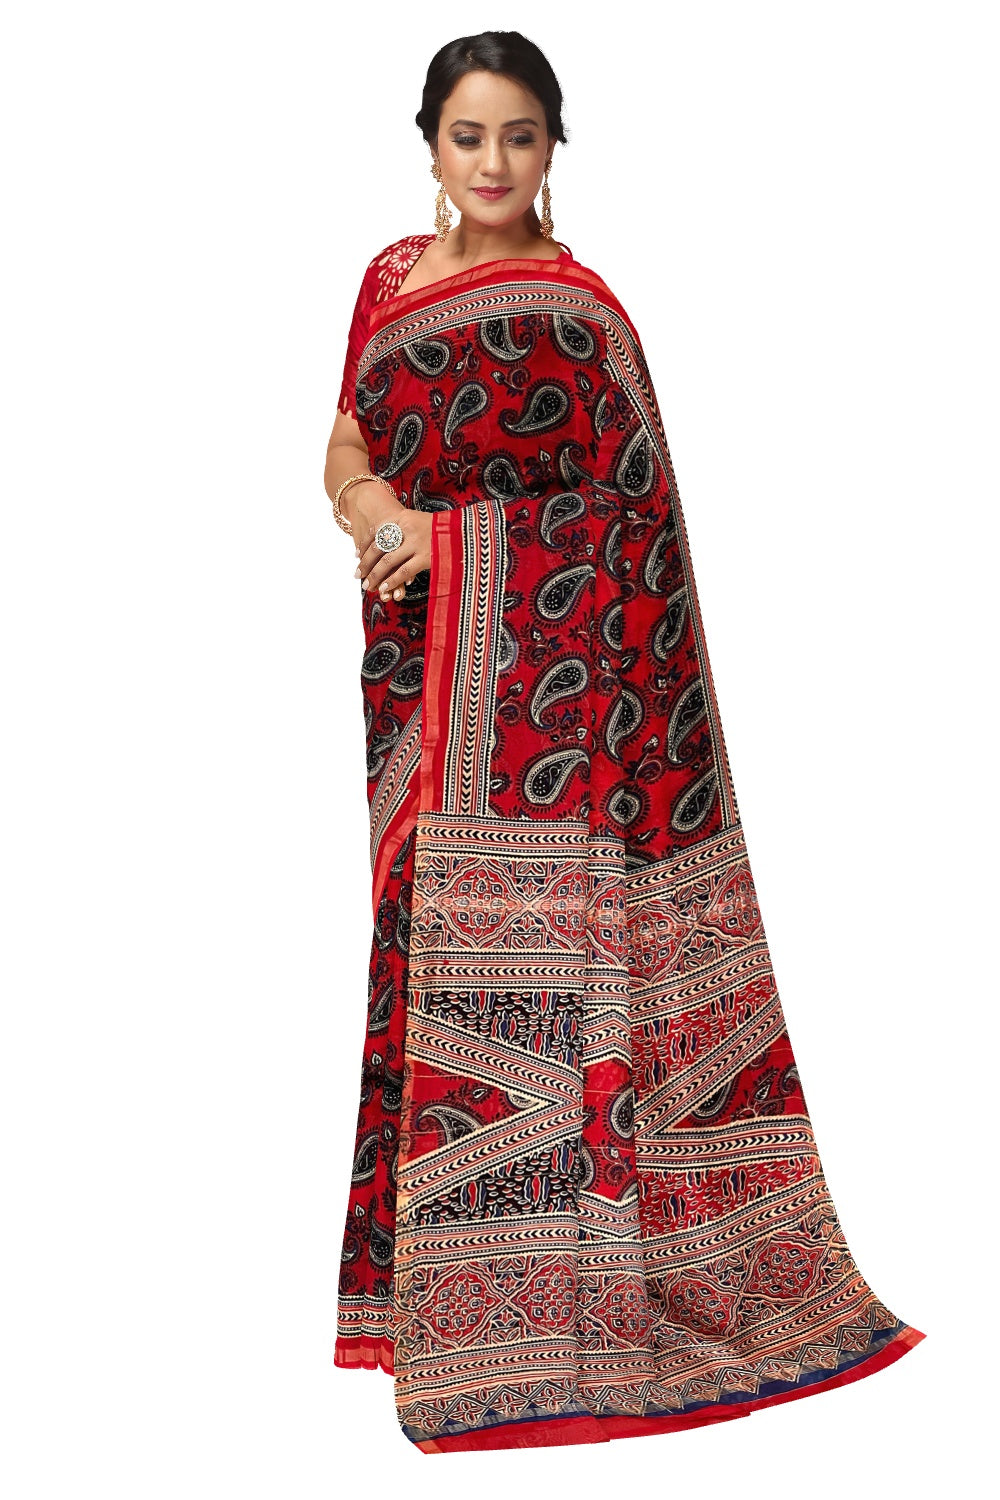 Southloom Cotton Red Paisley Design Saree with Ajrakh Printed Pallu